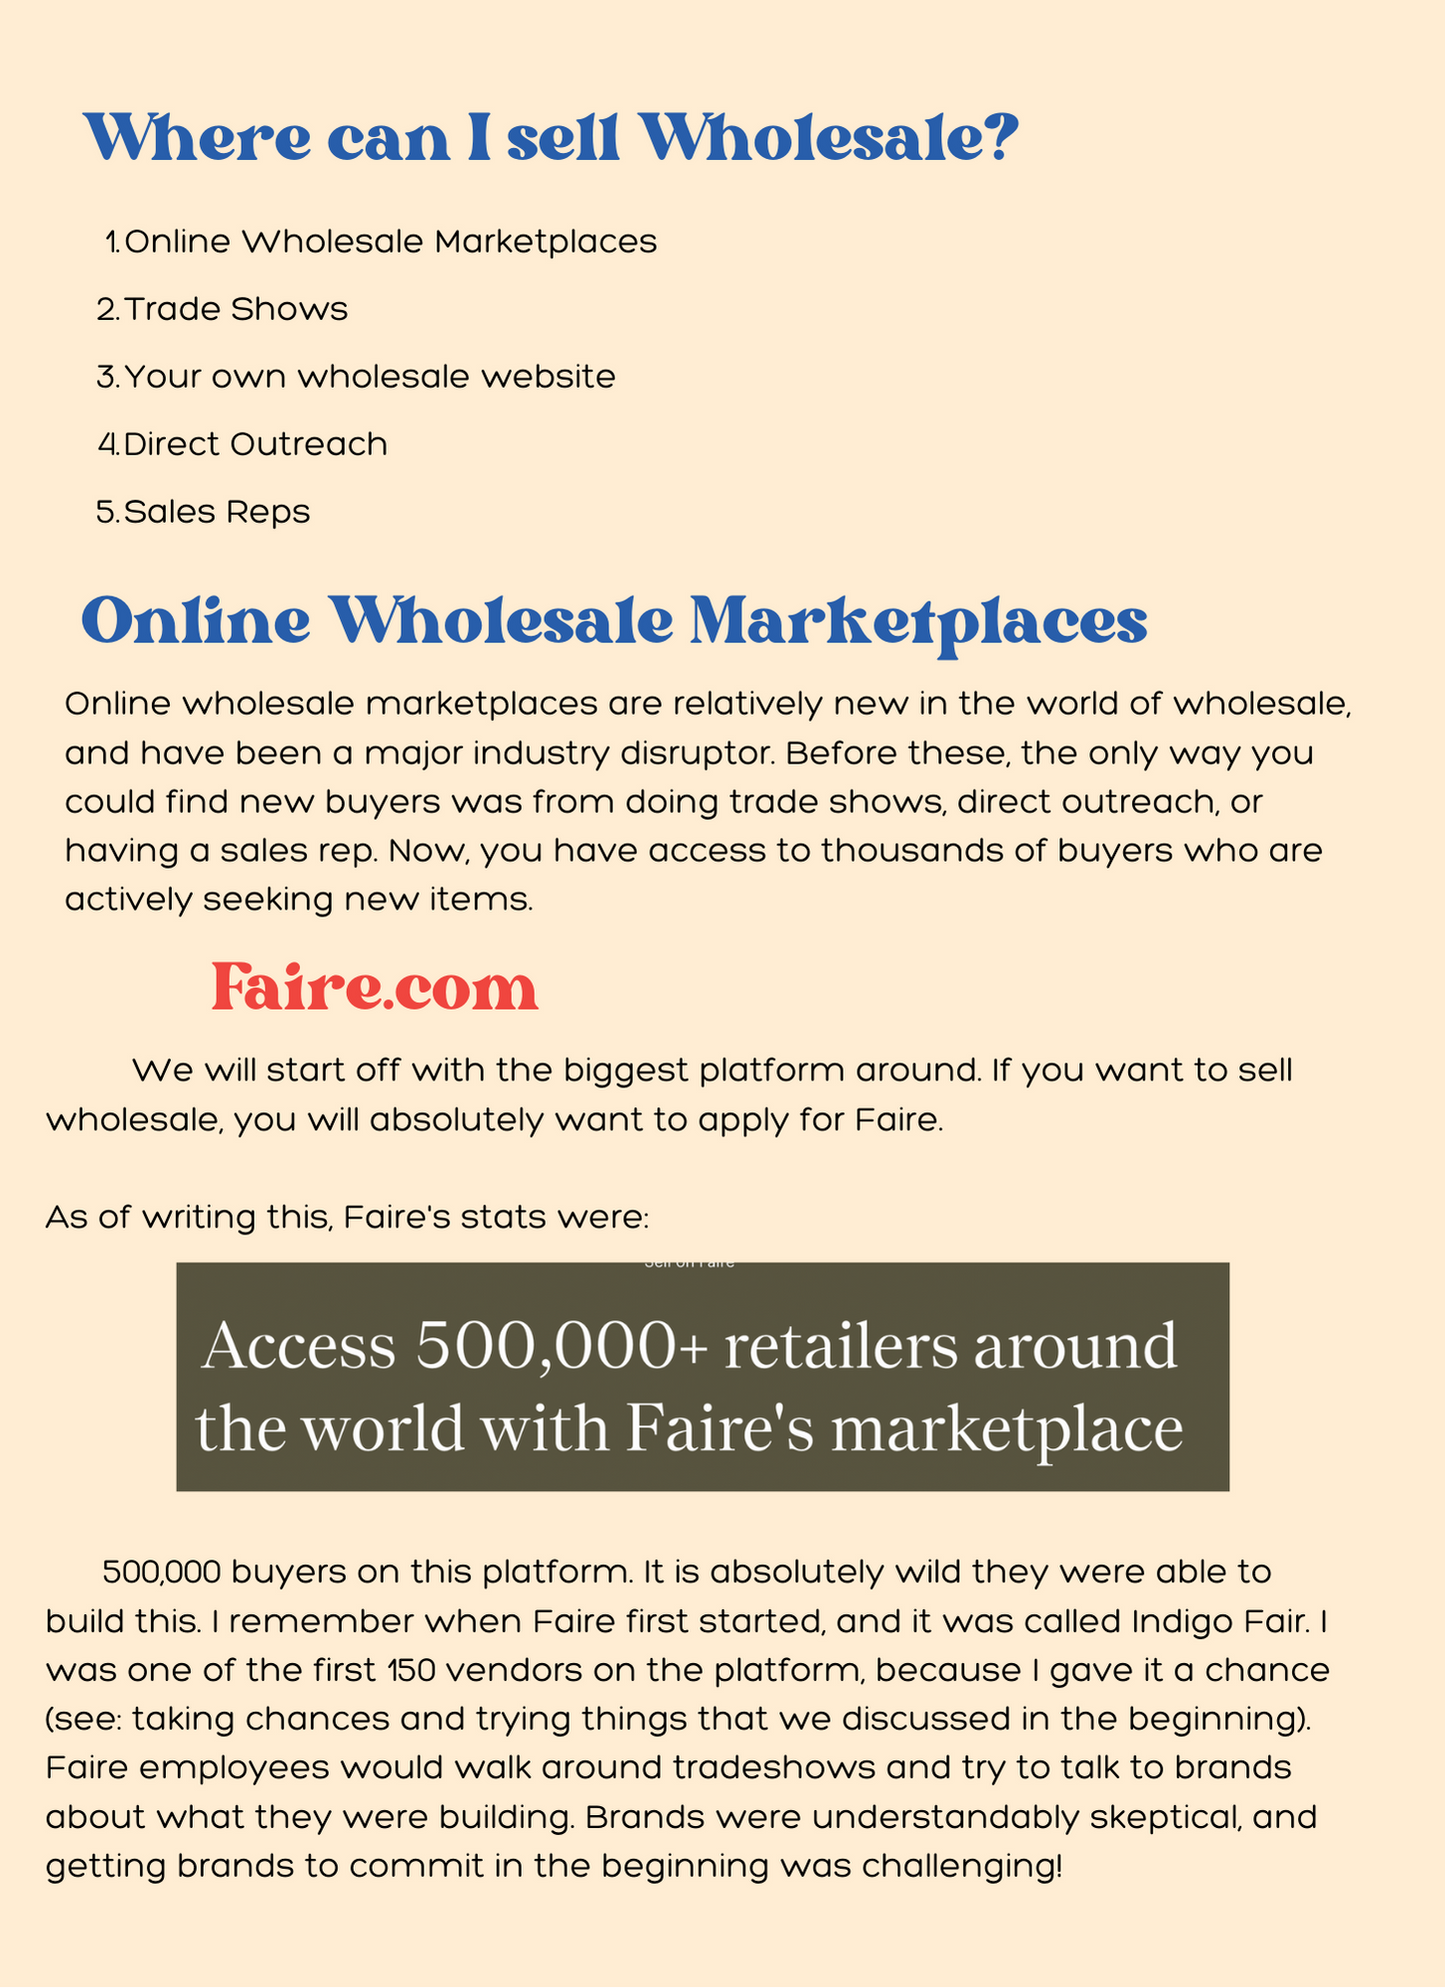 Guide to Selling Wholesale